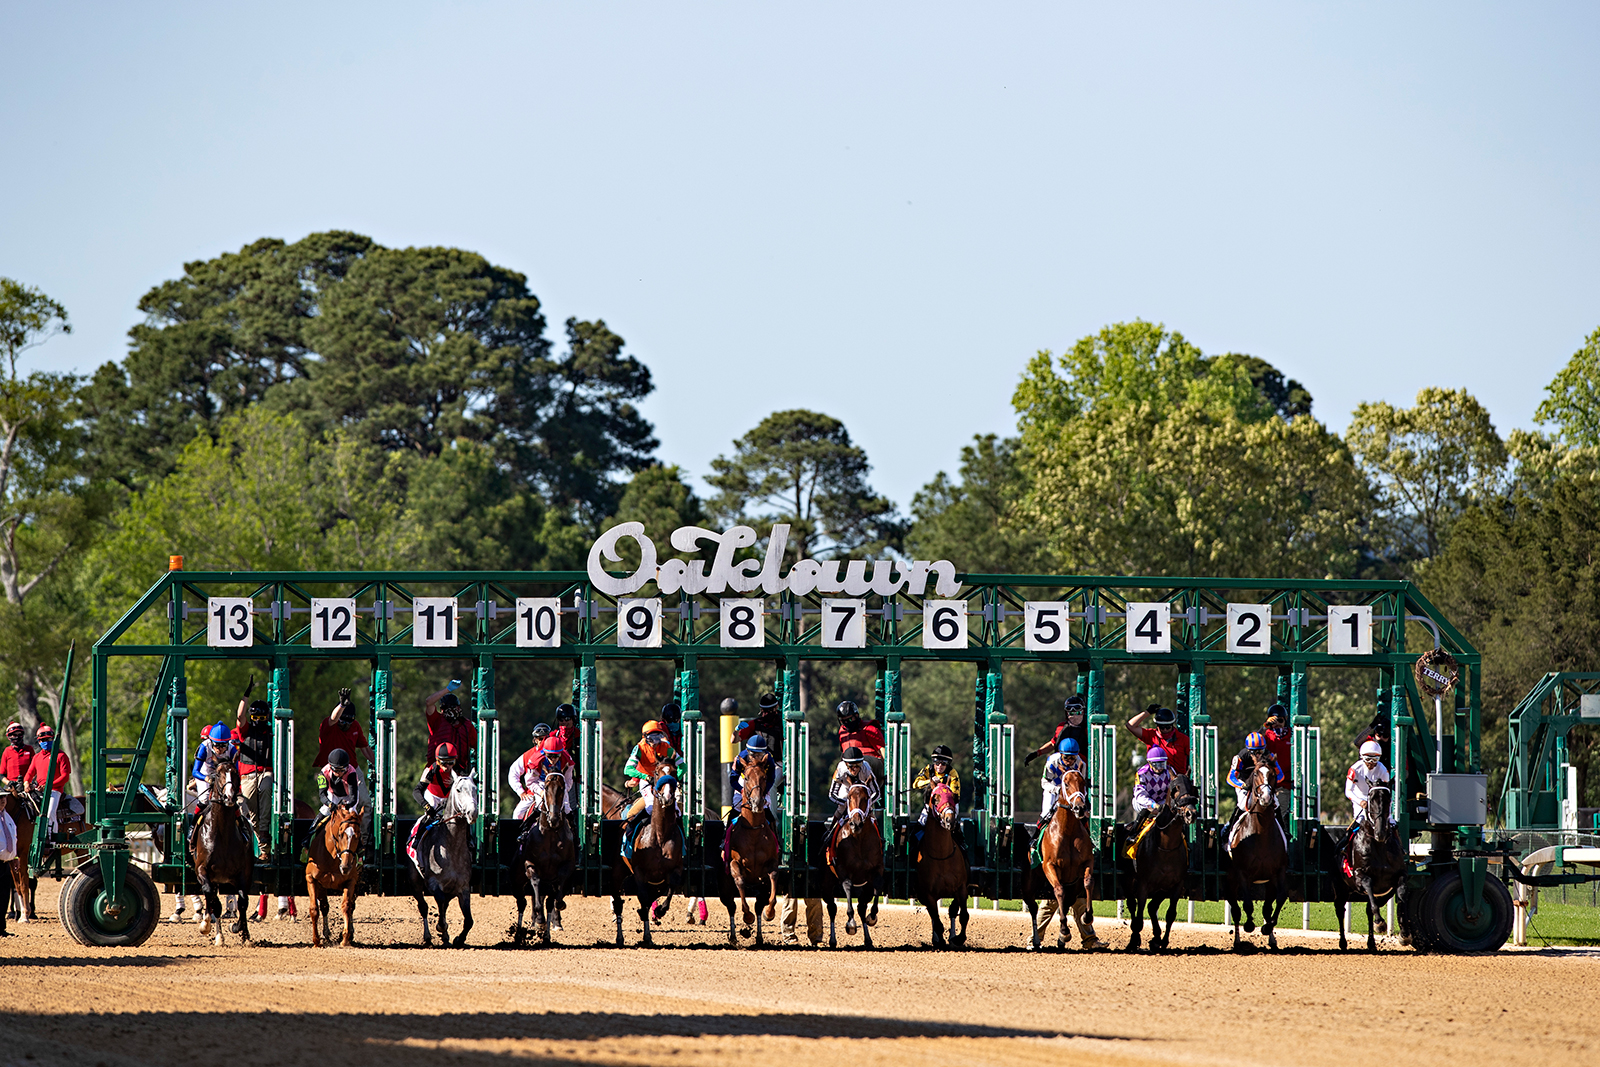 The start of the 10th race at Oaklawn Racing Casino Resort on Derby Day during the Covid-19 pandemic on Saturday, May 2, in Hot Springs, Arkansas.